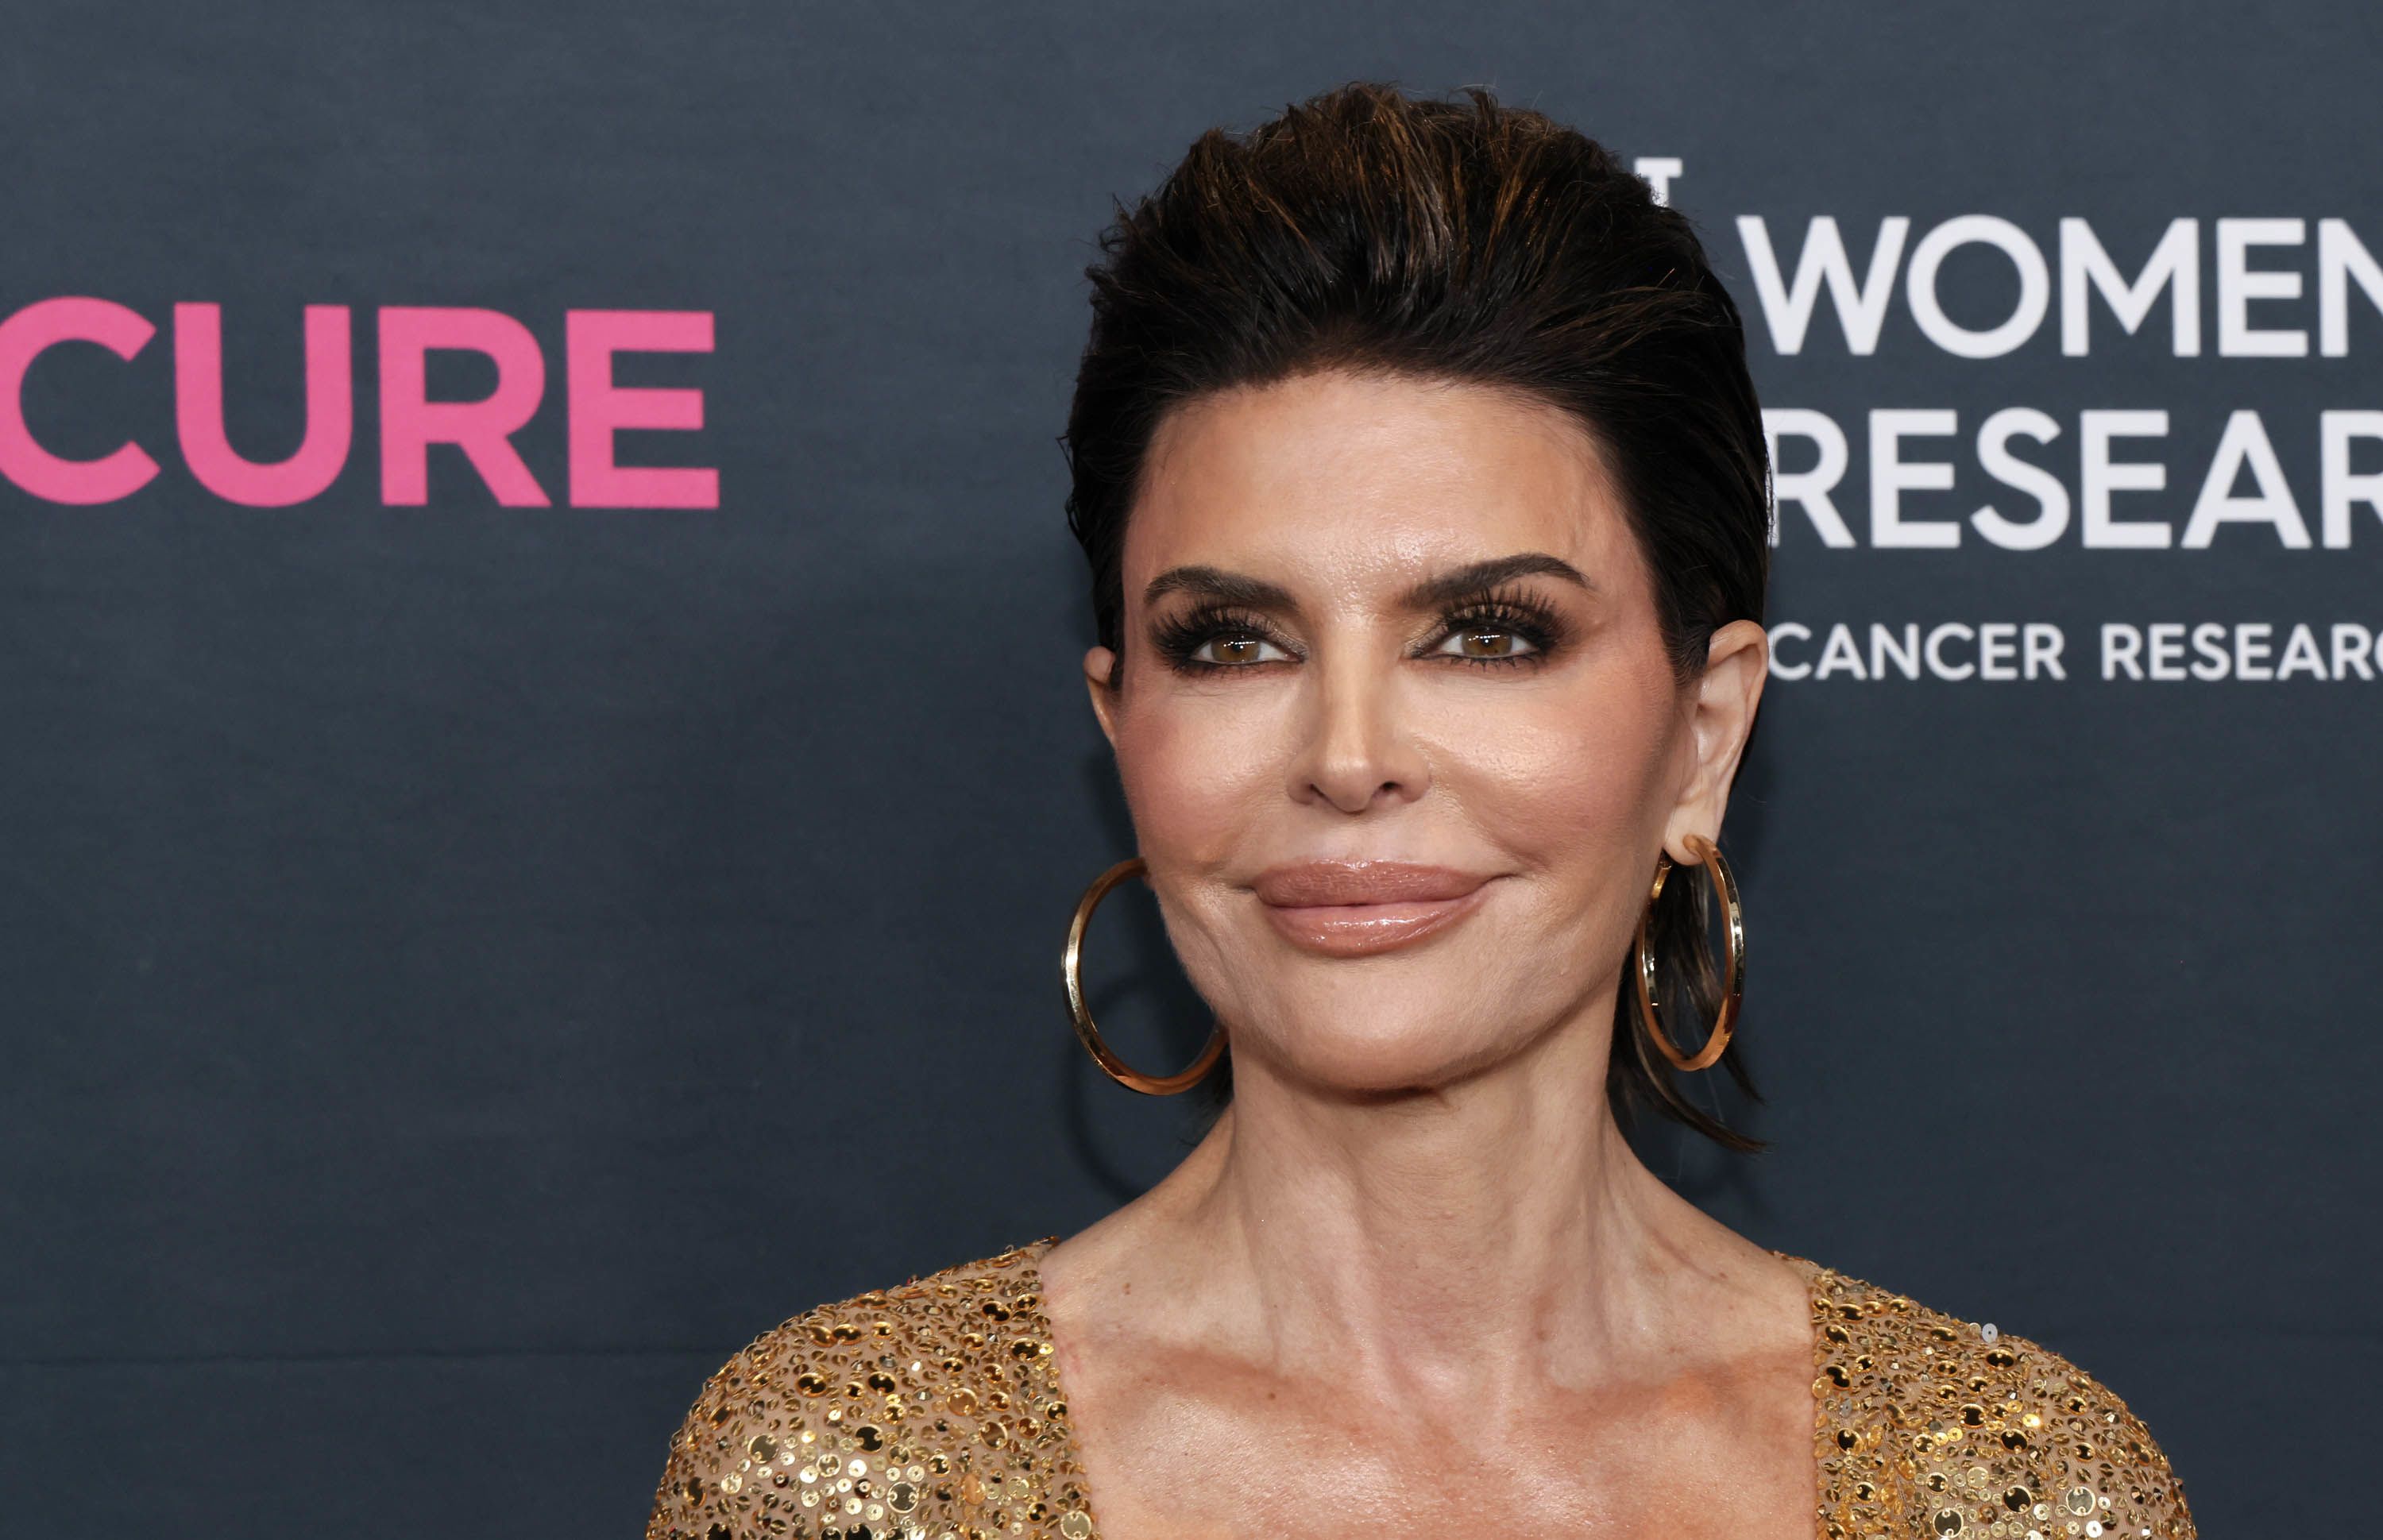 Lisa Rinna Eager to Return to 'Melrose Place' Role After Revival News